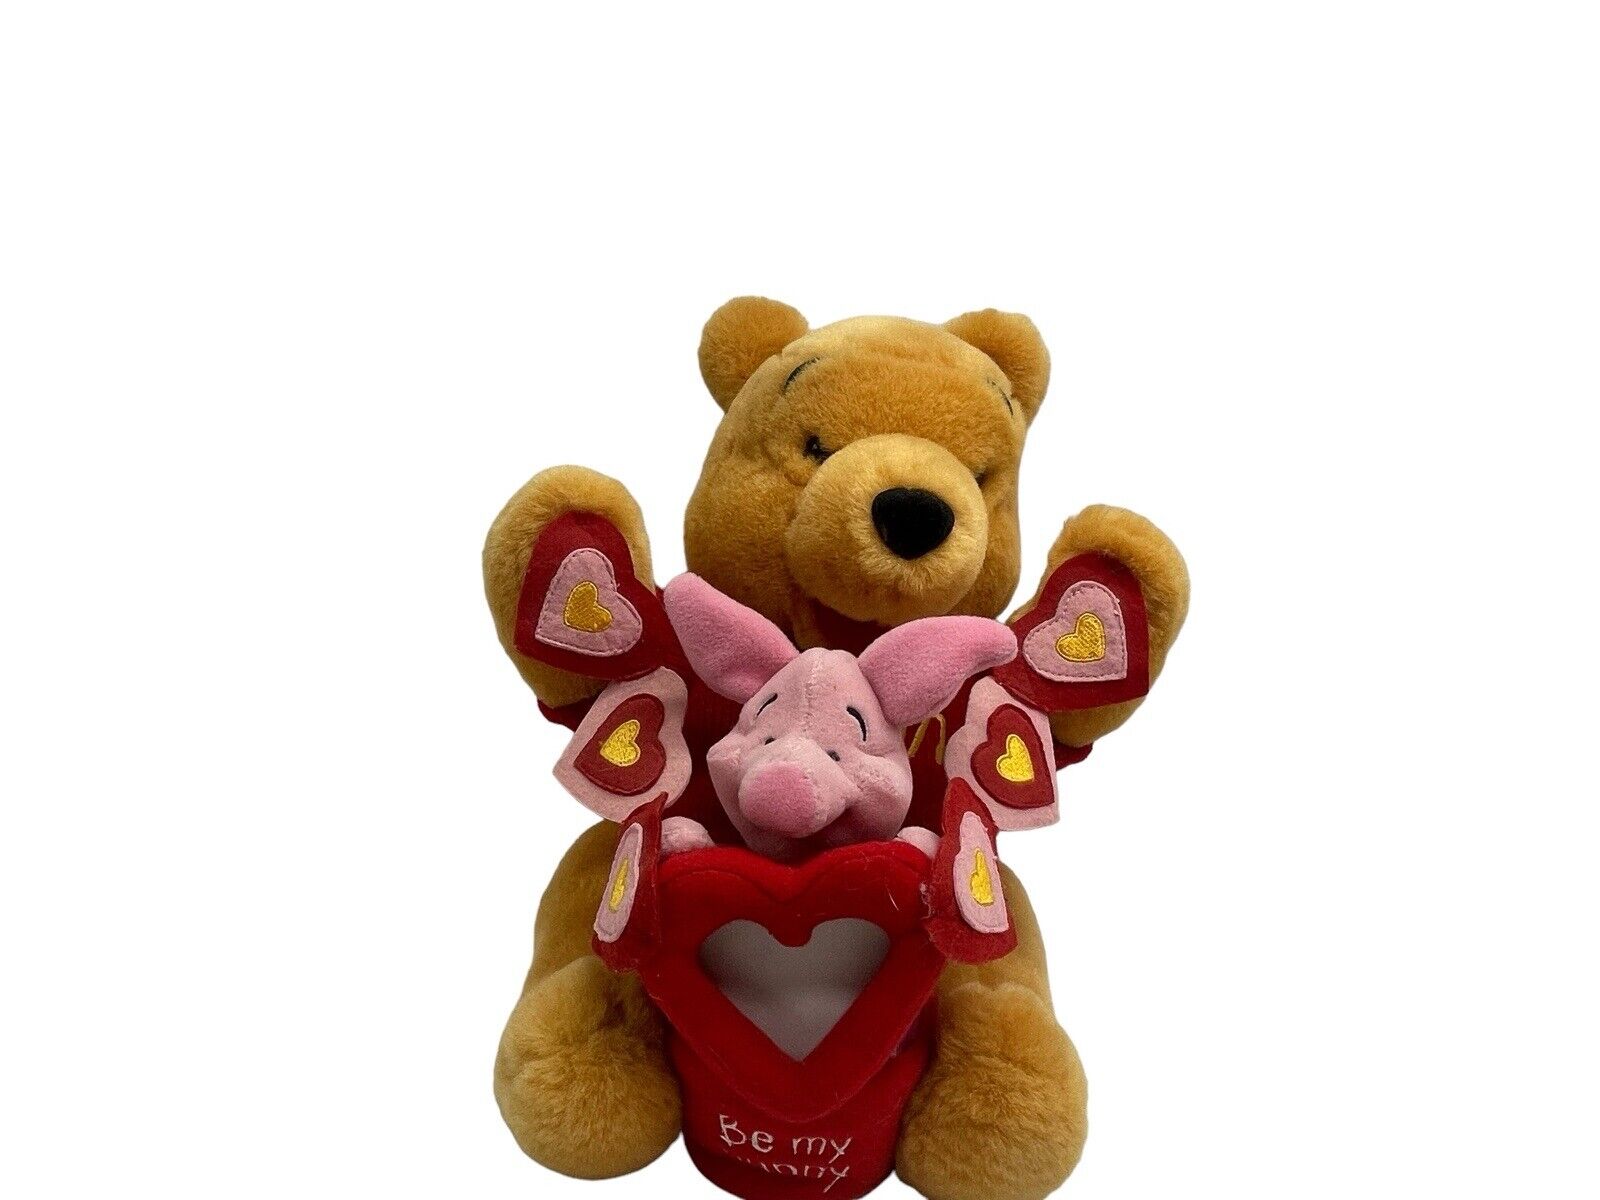 Winnie the Pooh and Piglet Valentines Be My Hunny Holding Hearts Stuffed Animal